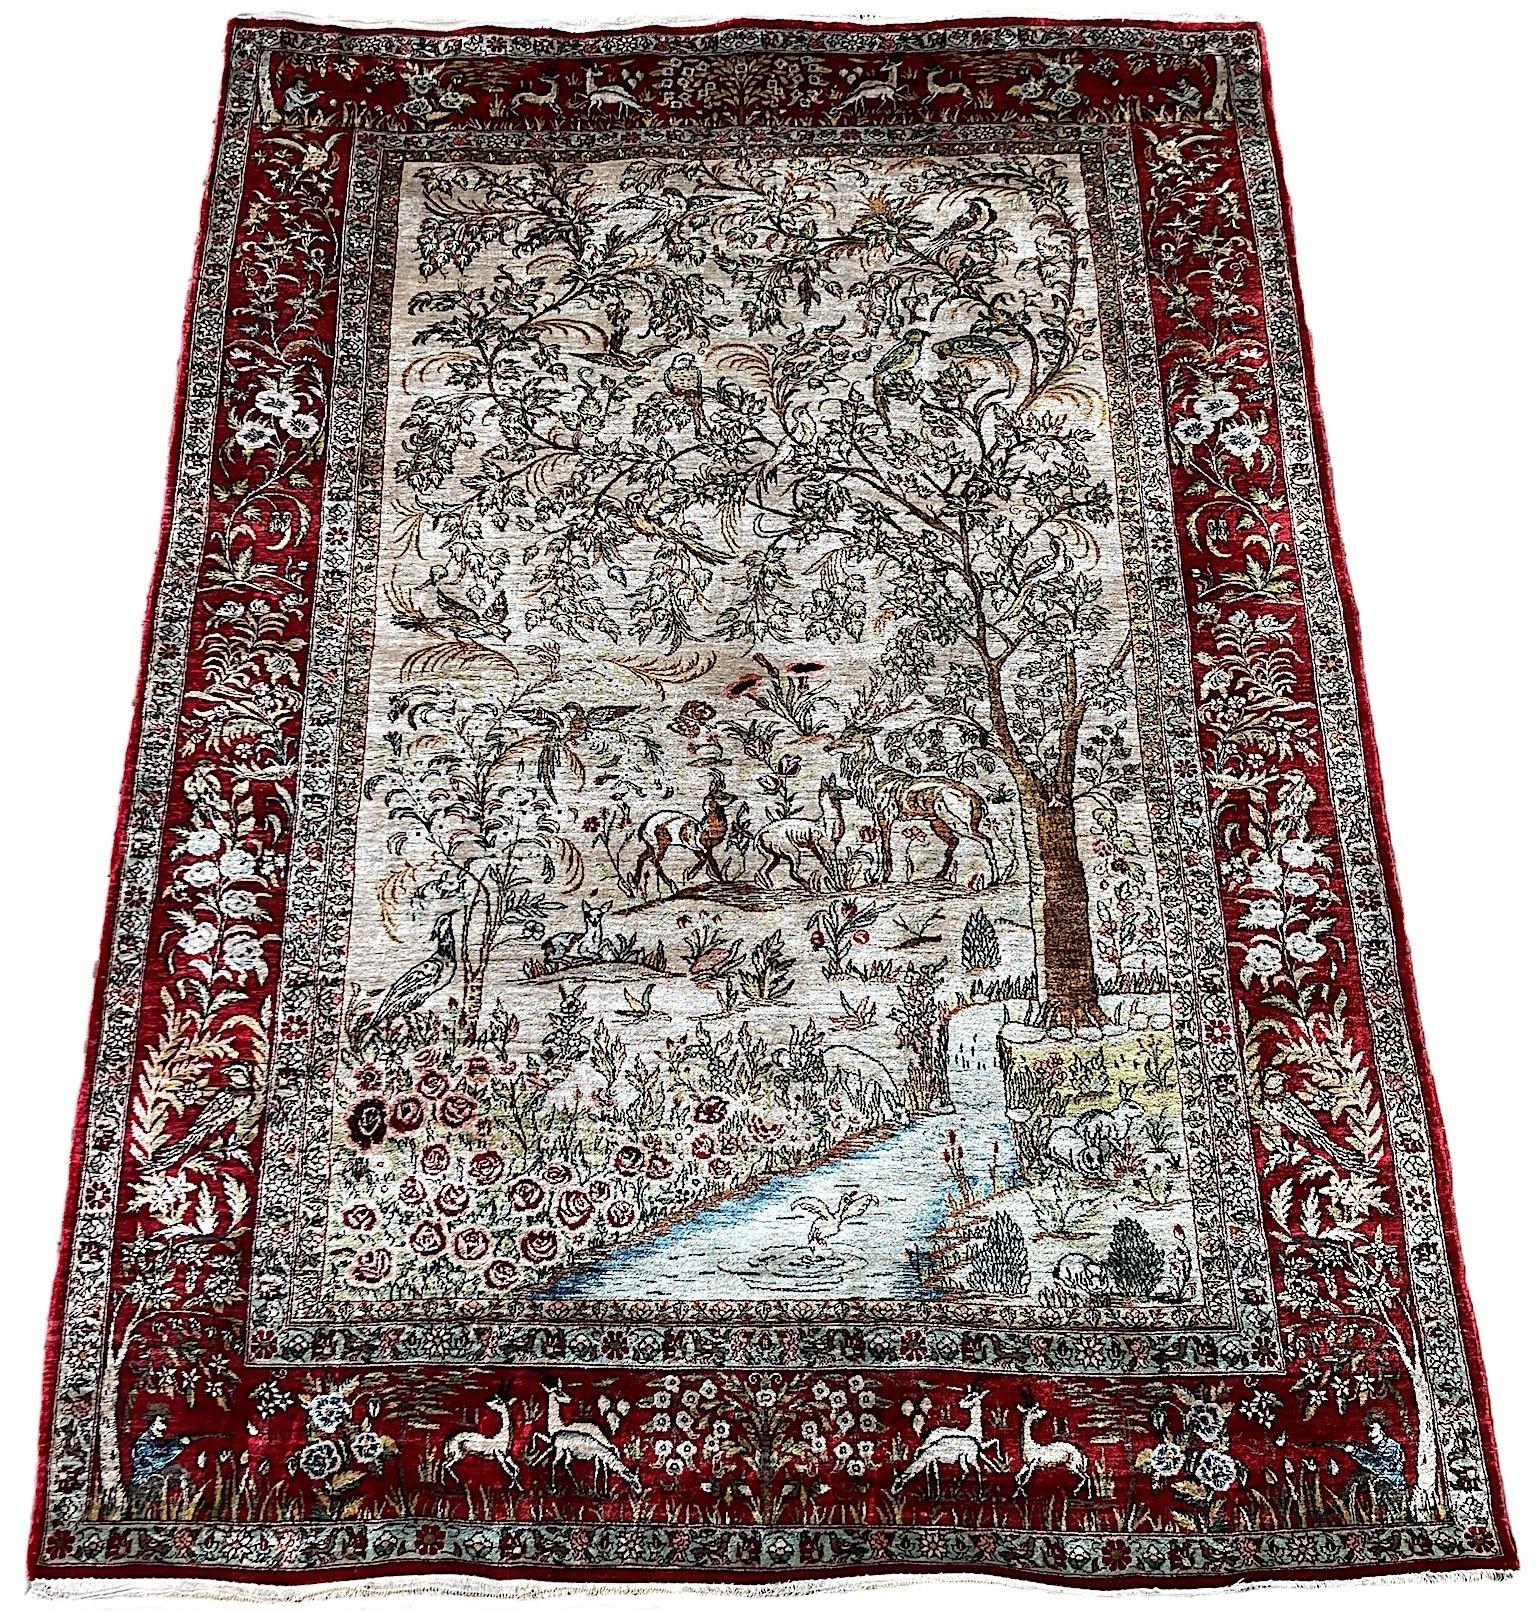 An exceptional silk Qum rug, hand woven in the mid 20th Century. The rug features a classic hunting scene design with all manner of flower and fauna on an ivory field and red border. Finely woven with excellent quality silk, this rug has virtually